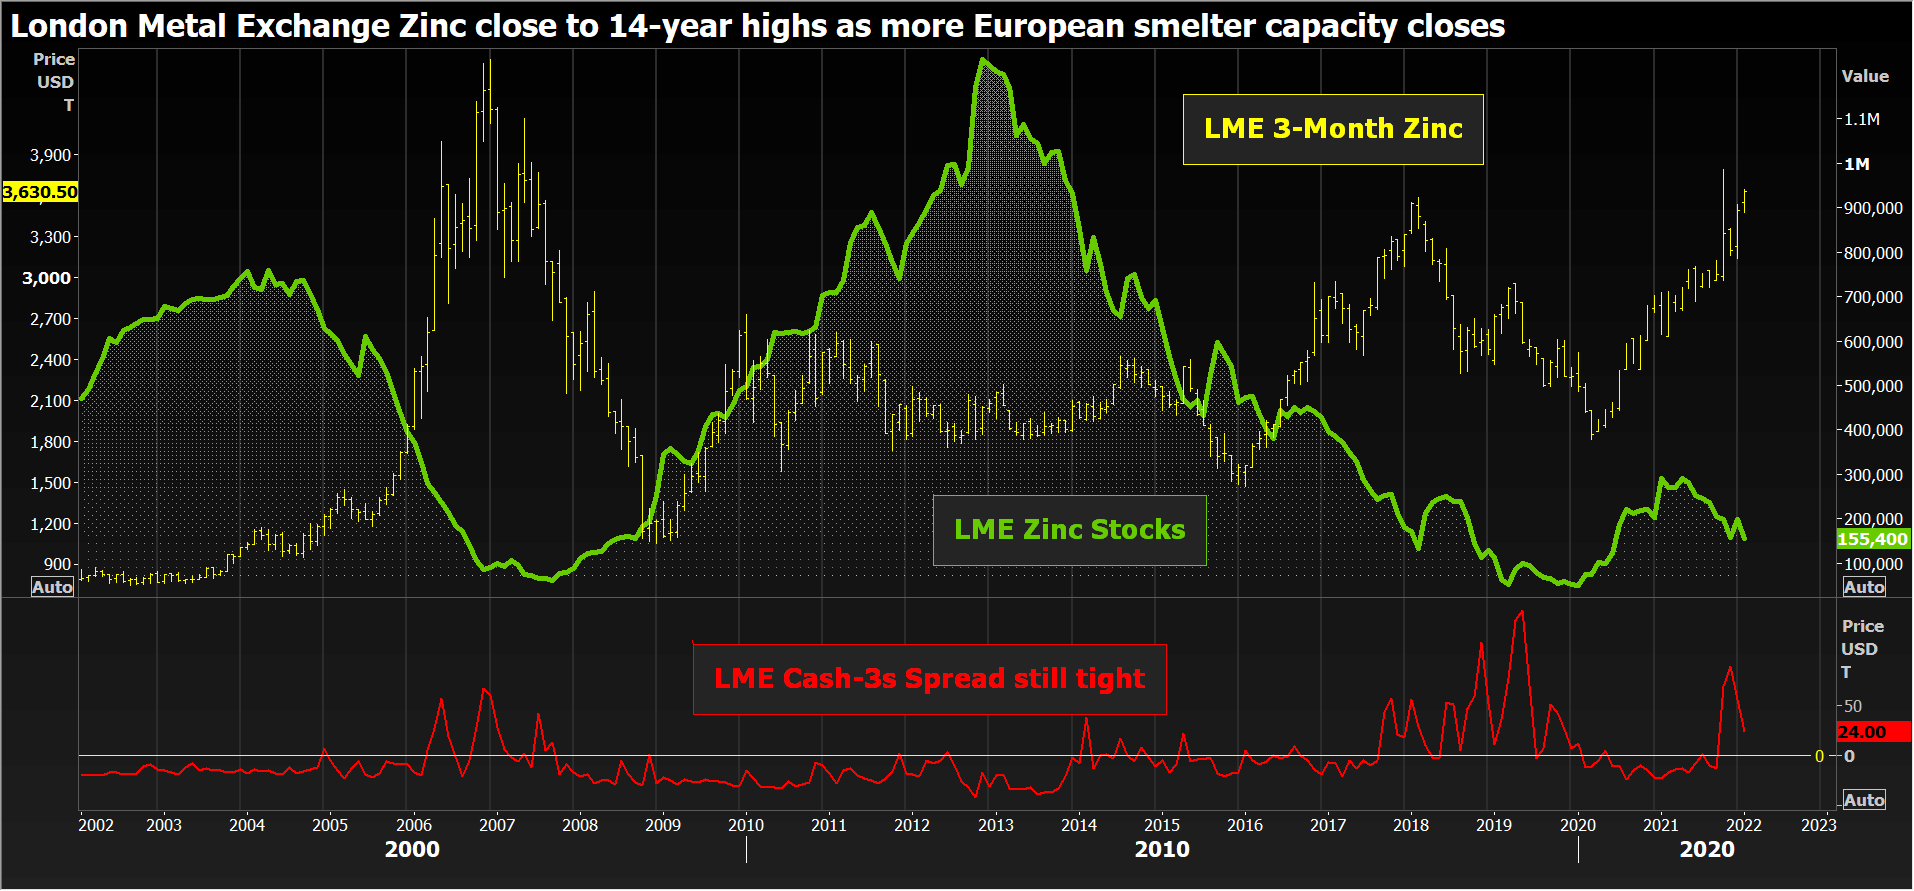 LME zinc closes back in on its 14-year highs as more European smelter capacity powers down